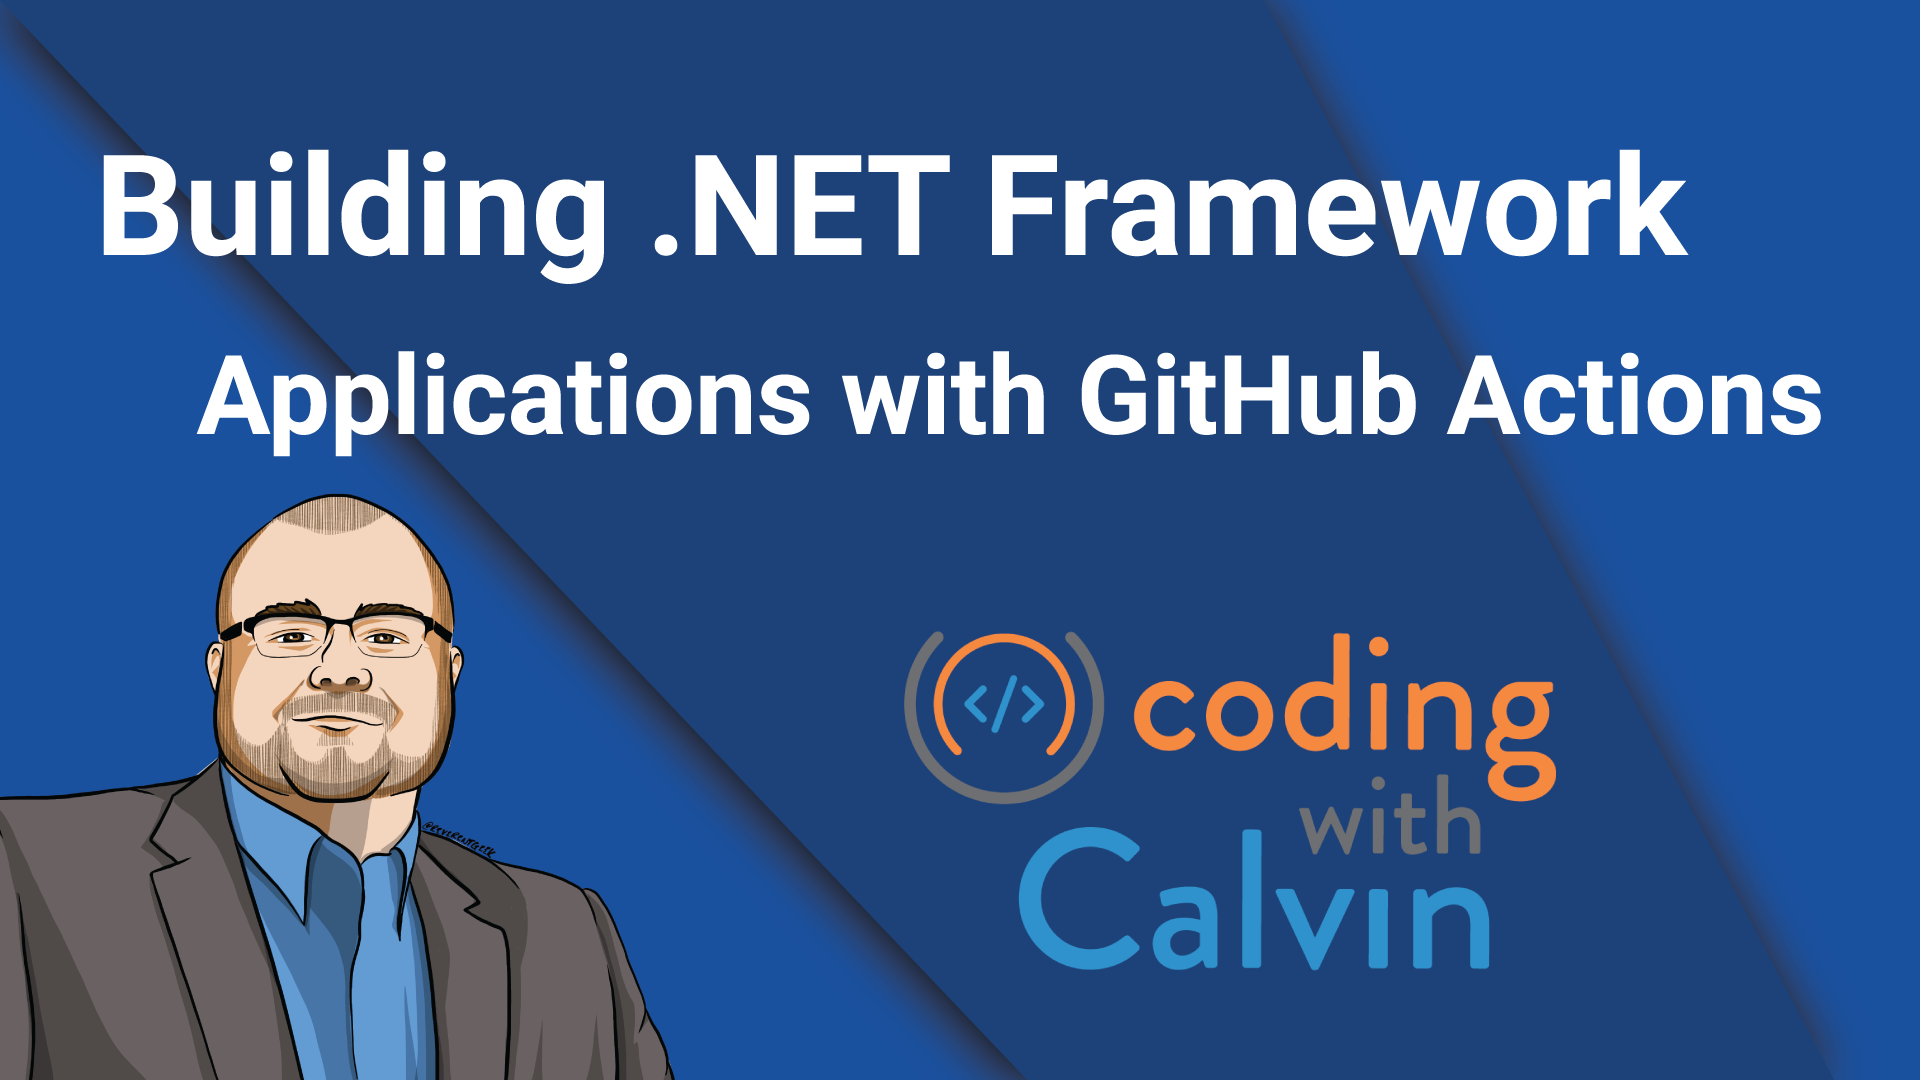 Building .NET Framework Applications with Github Actions